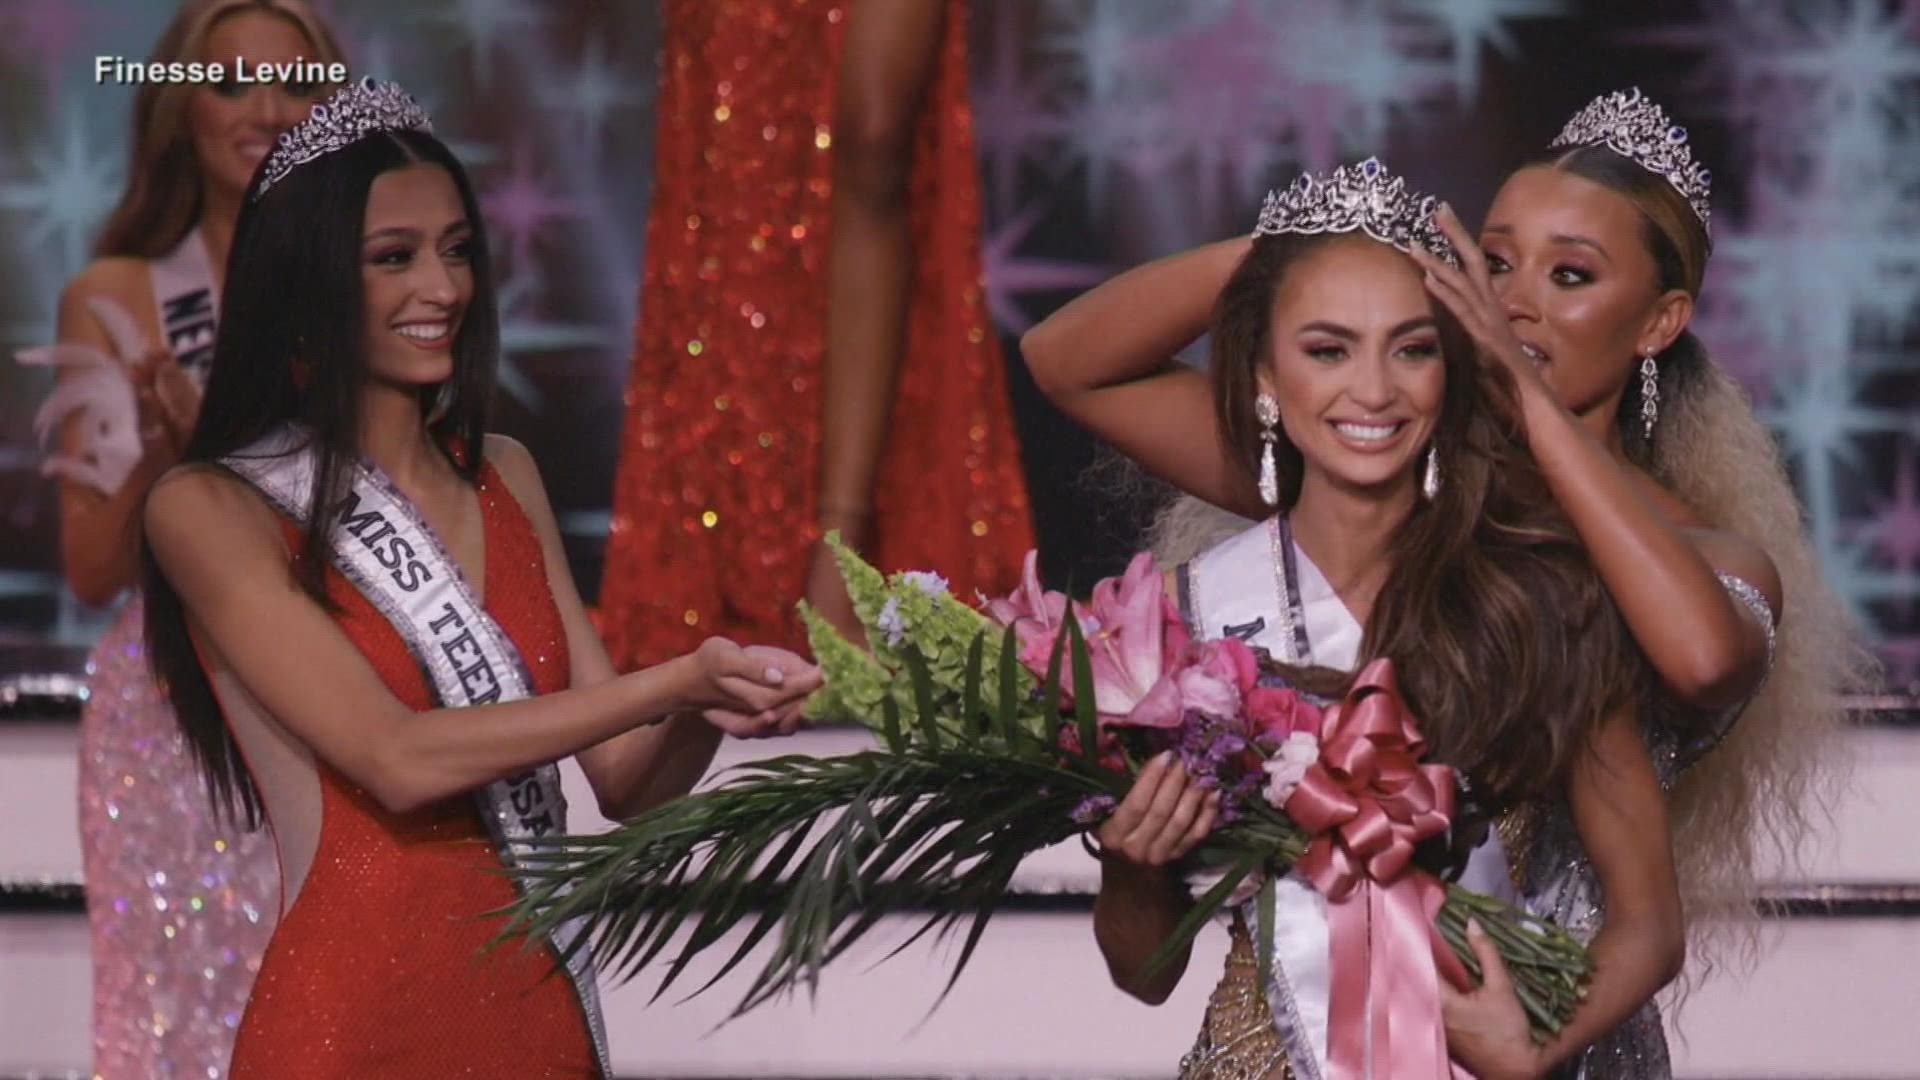 WFAA spoke to Miss USA's former professor at the University of North Texas, and Averie Bishop, who was crowned Miss Texas.